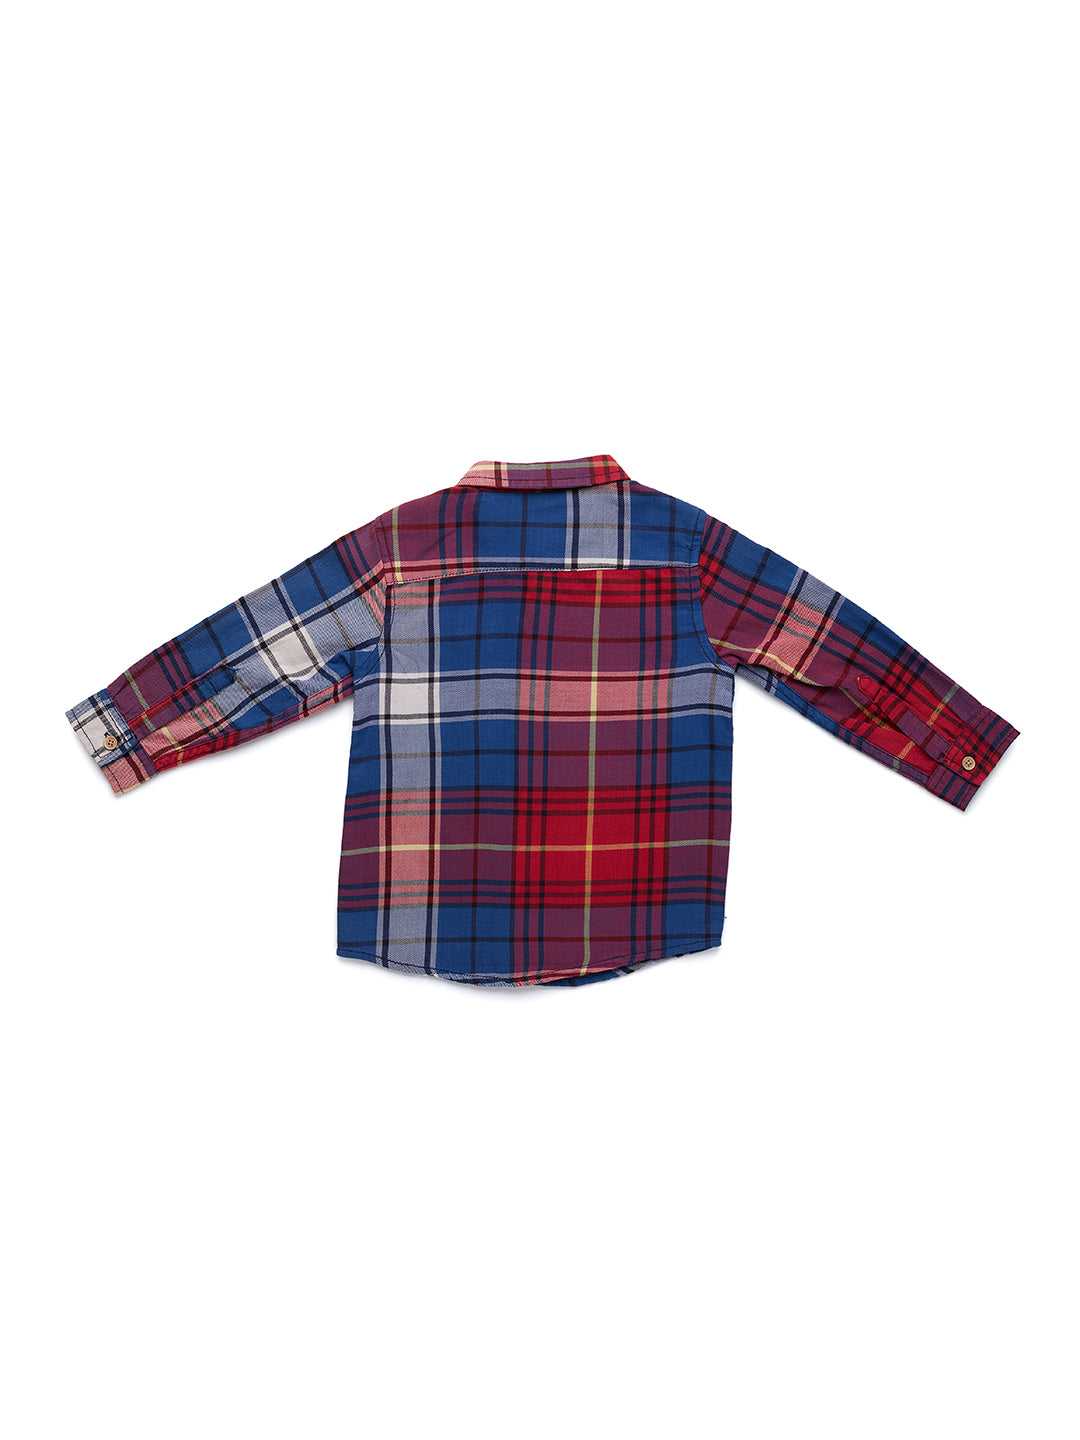 Nuberry Boys Full Sleeve Red and Blue Checked Shirt